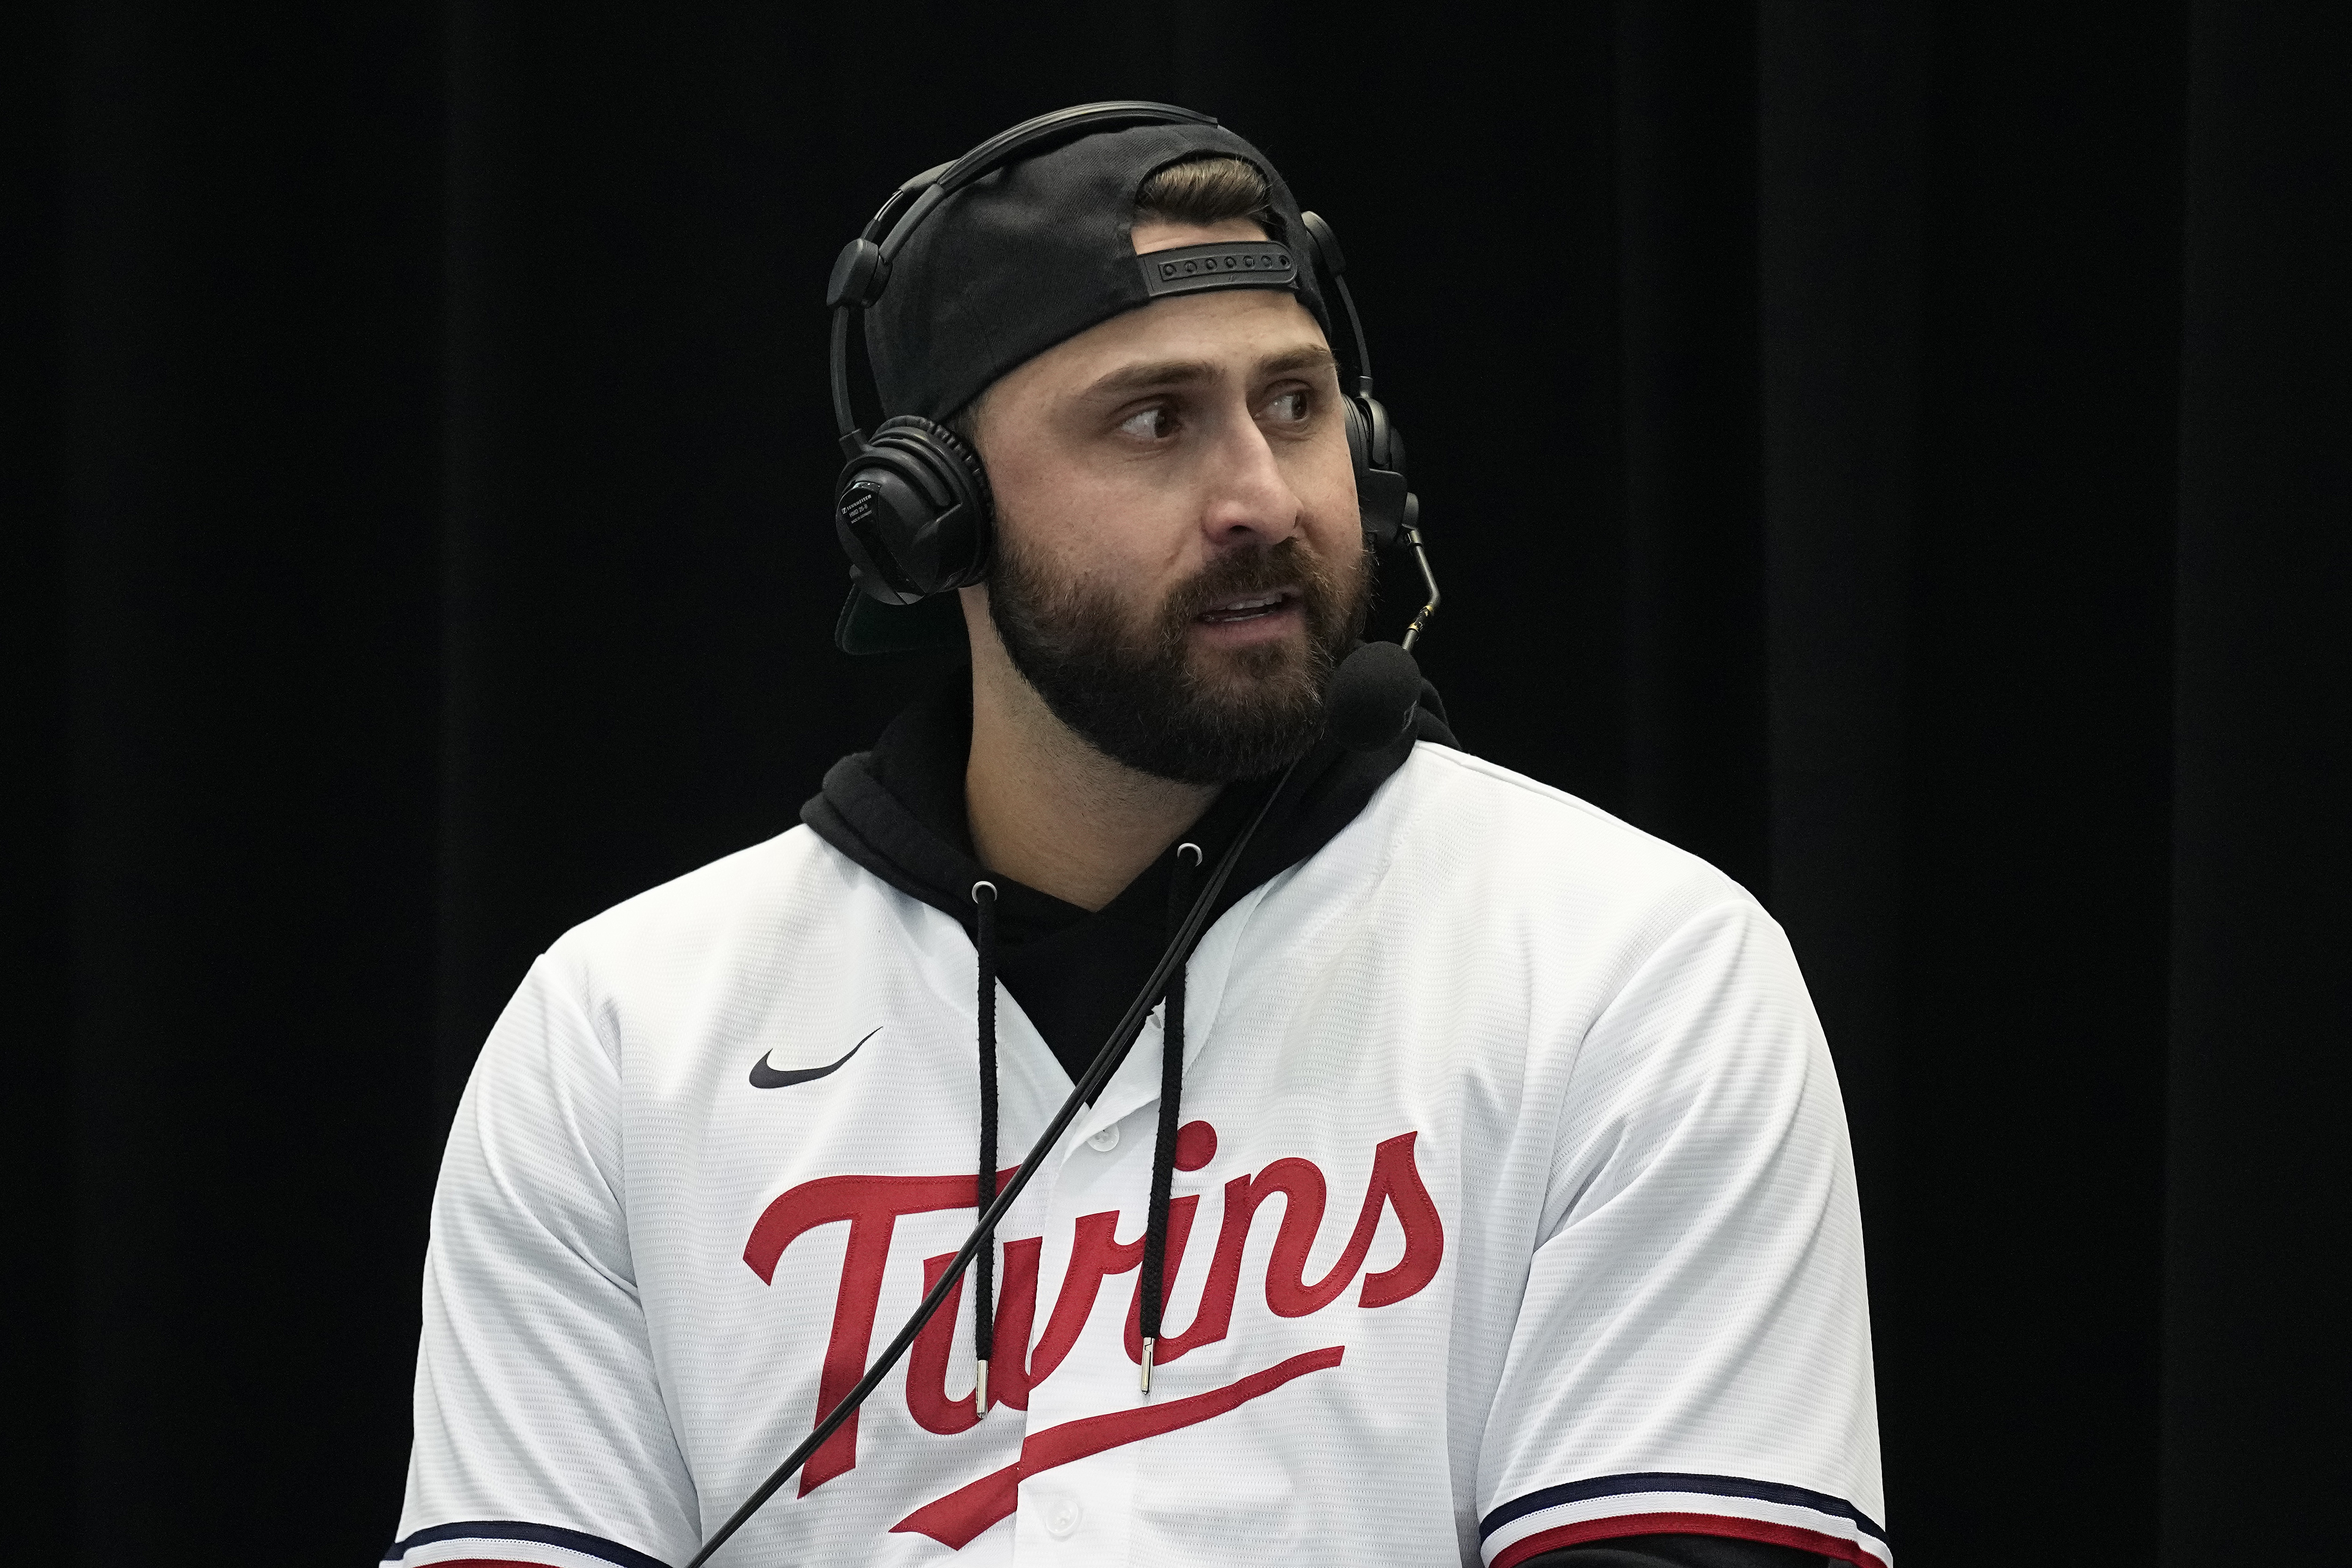 You bum': Yankees fan goes off on Twins' Joey Gallo after clubbing